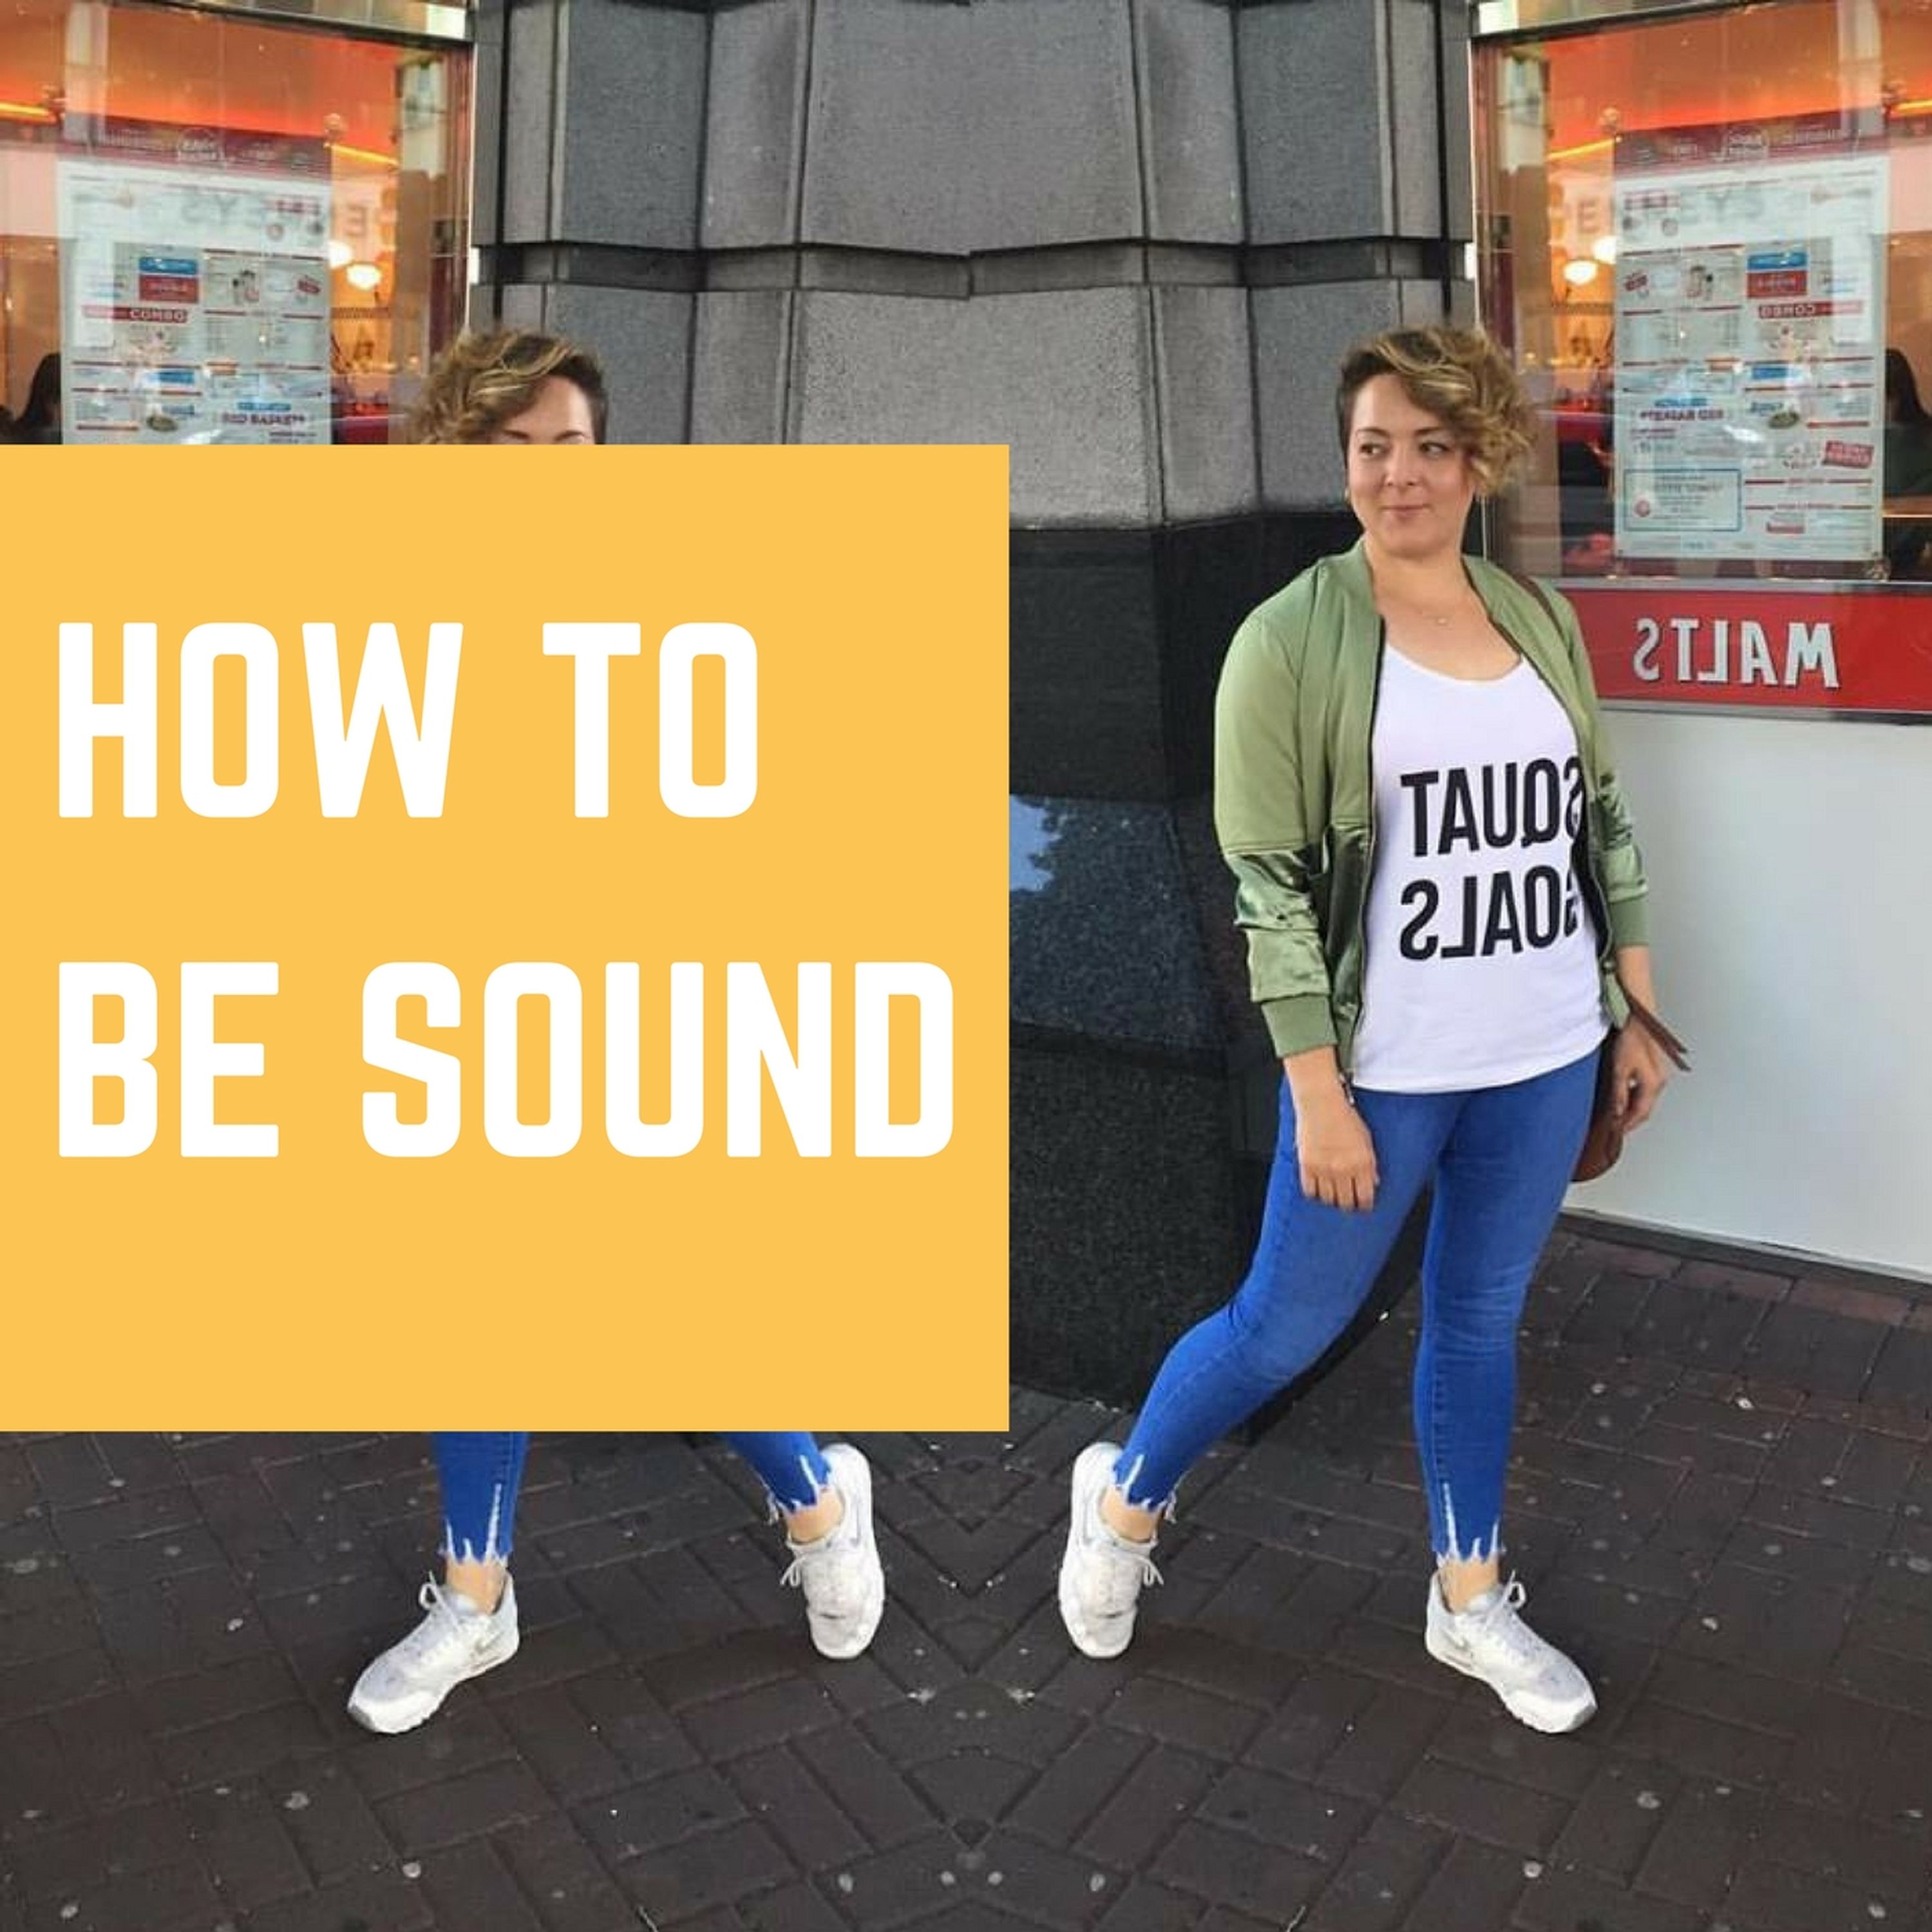 Anna Sheils McNamee on how to be sound